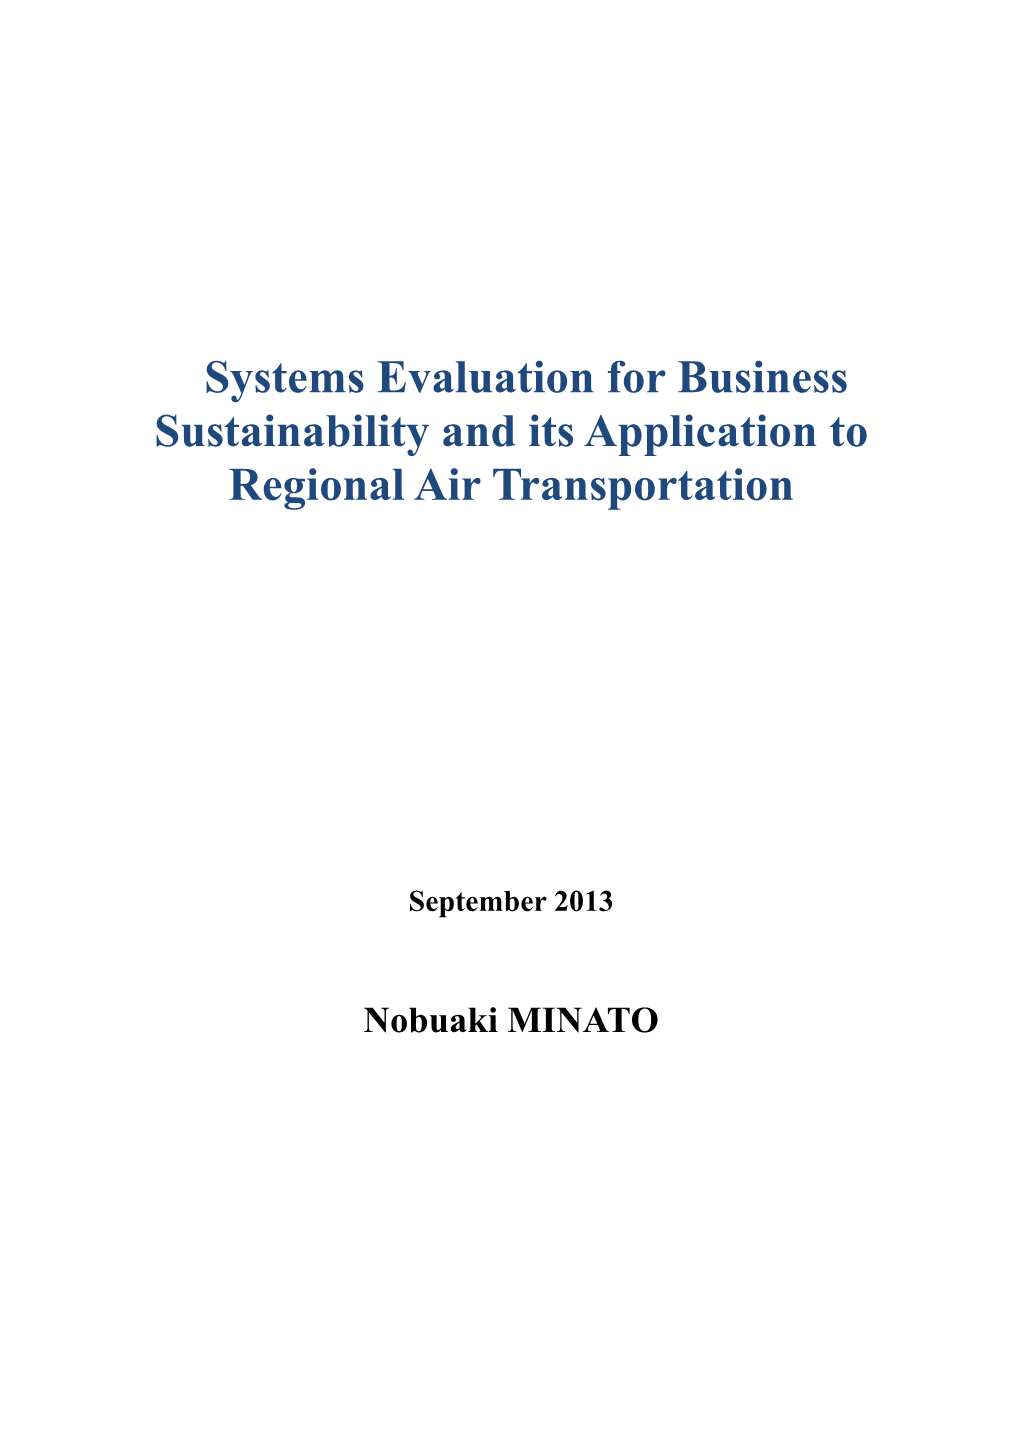 Systems Evaluation for Business Sustainability and Its Application to Regional Air Transportation